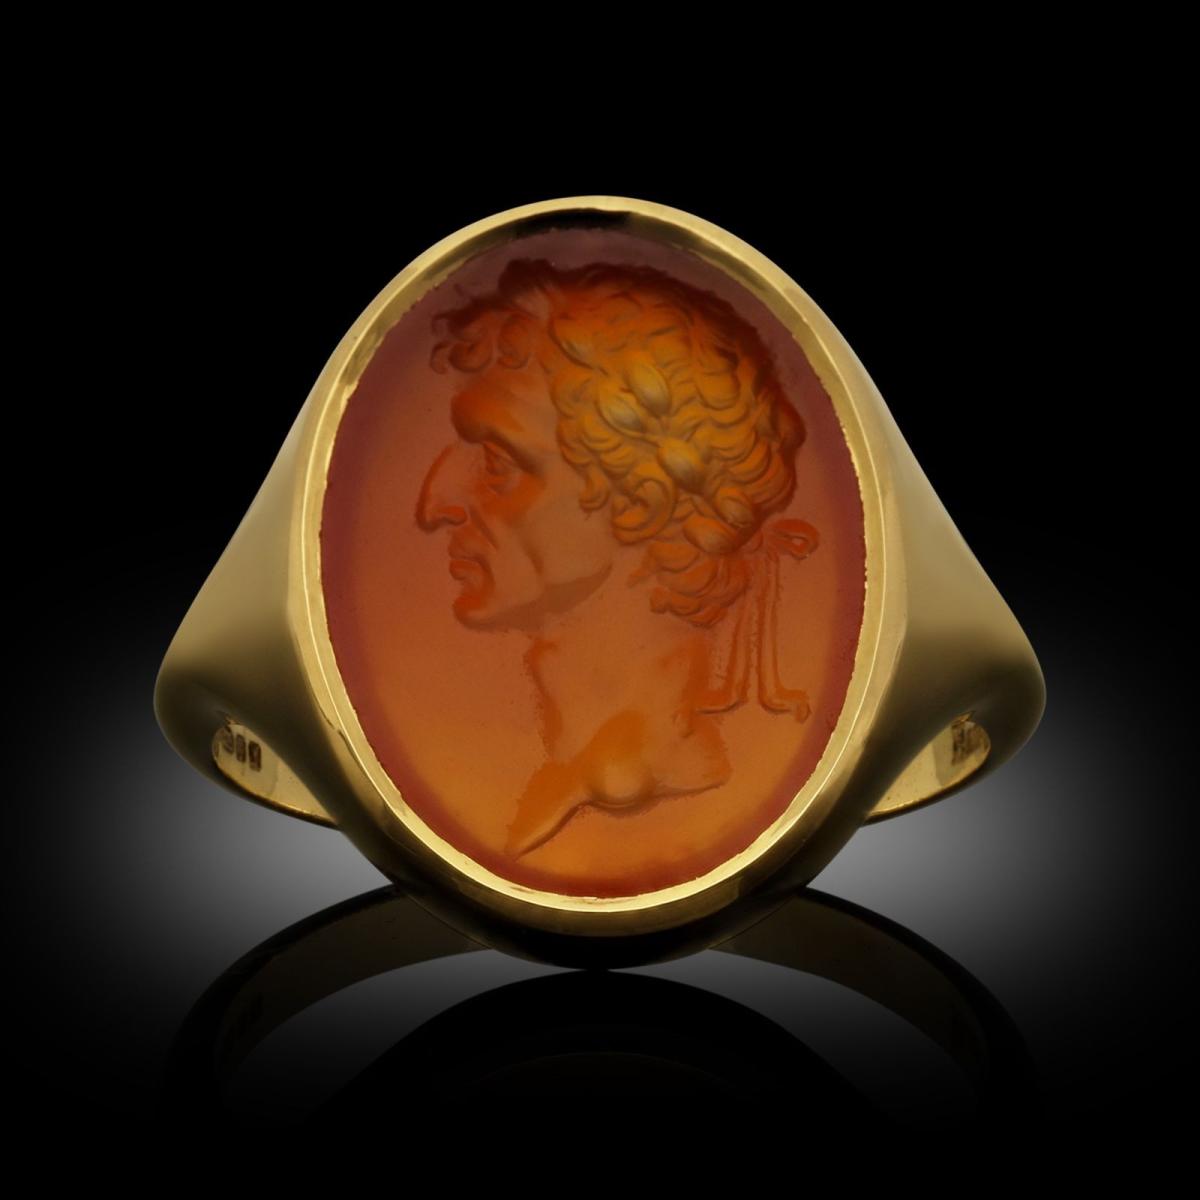 Hancocks Contemporary 22ct Gold Signet Ring Set With An Antique Carnelian Intaglio